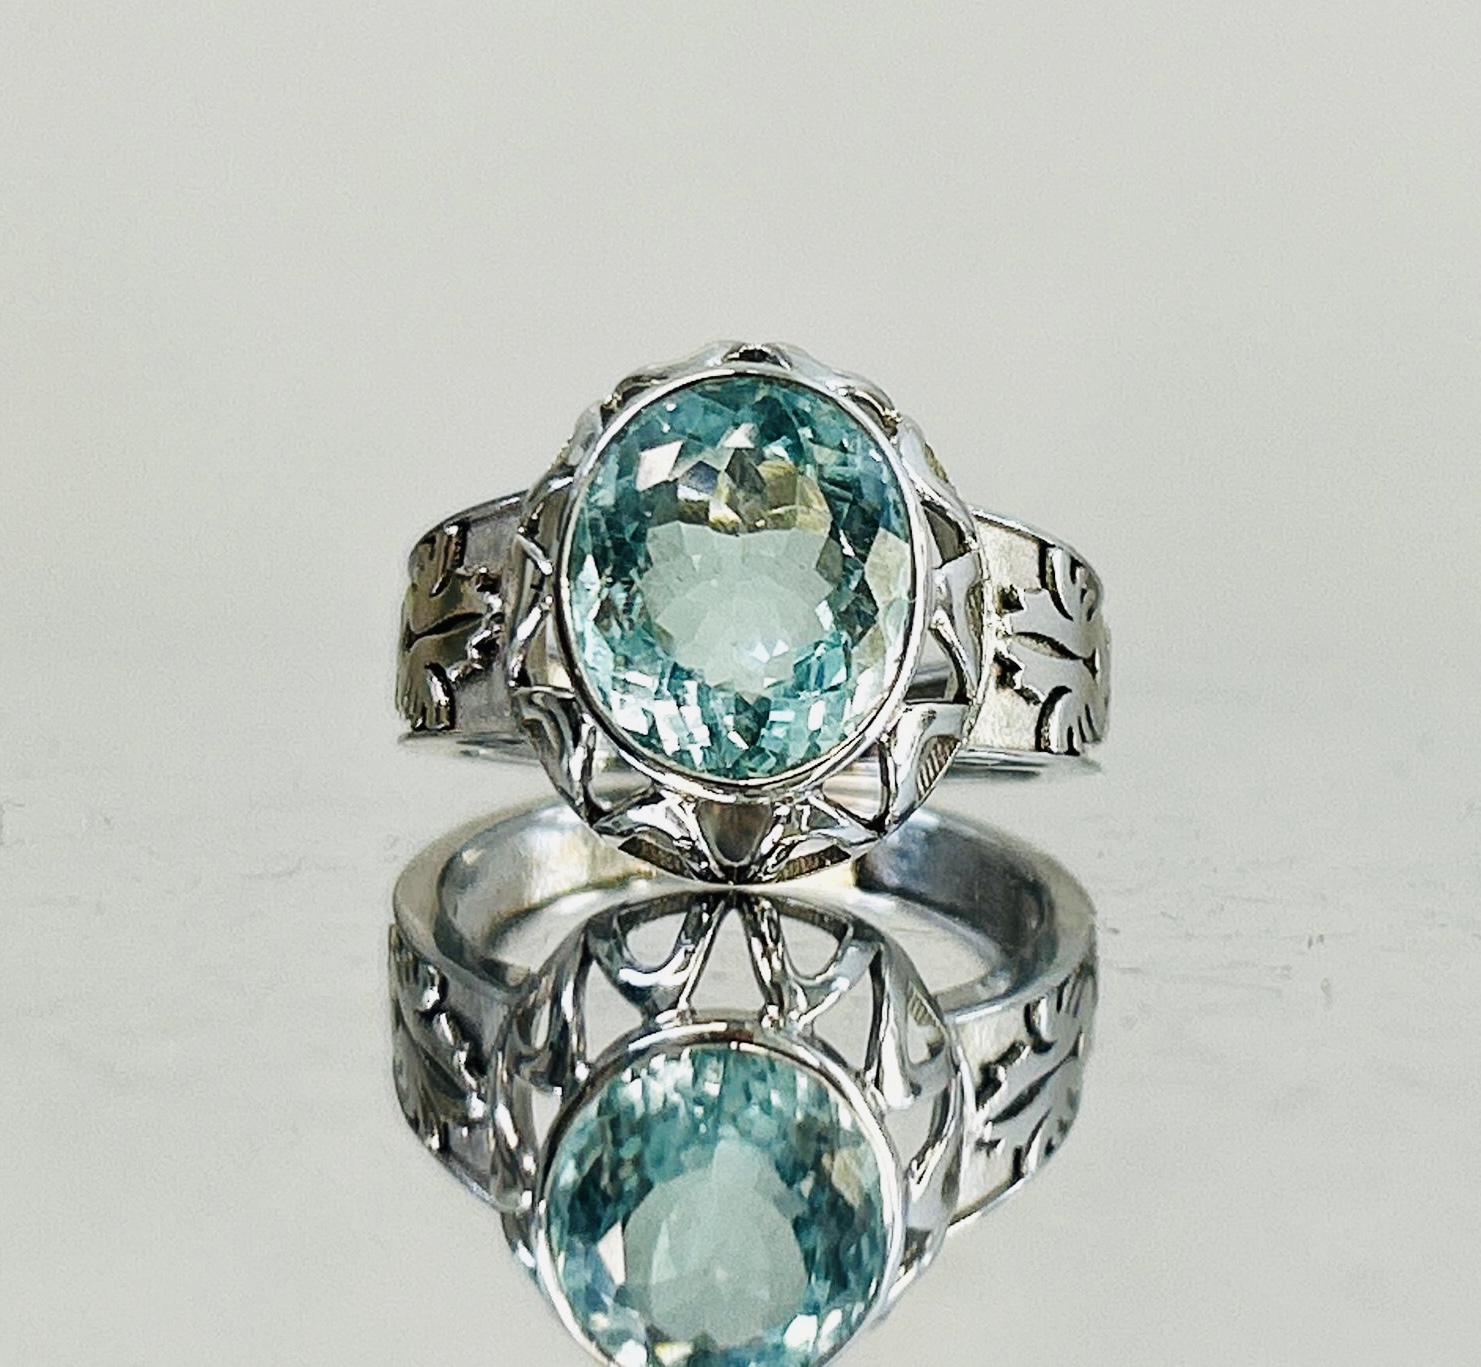 Beautiful Natural Flawless 4.58 CT Aquamarine Ring With Diamonds and 18k Gold - Image 2 of 5